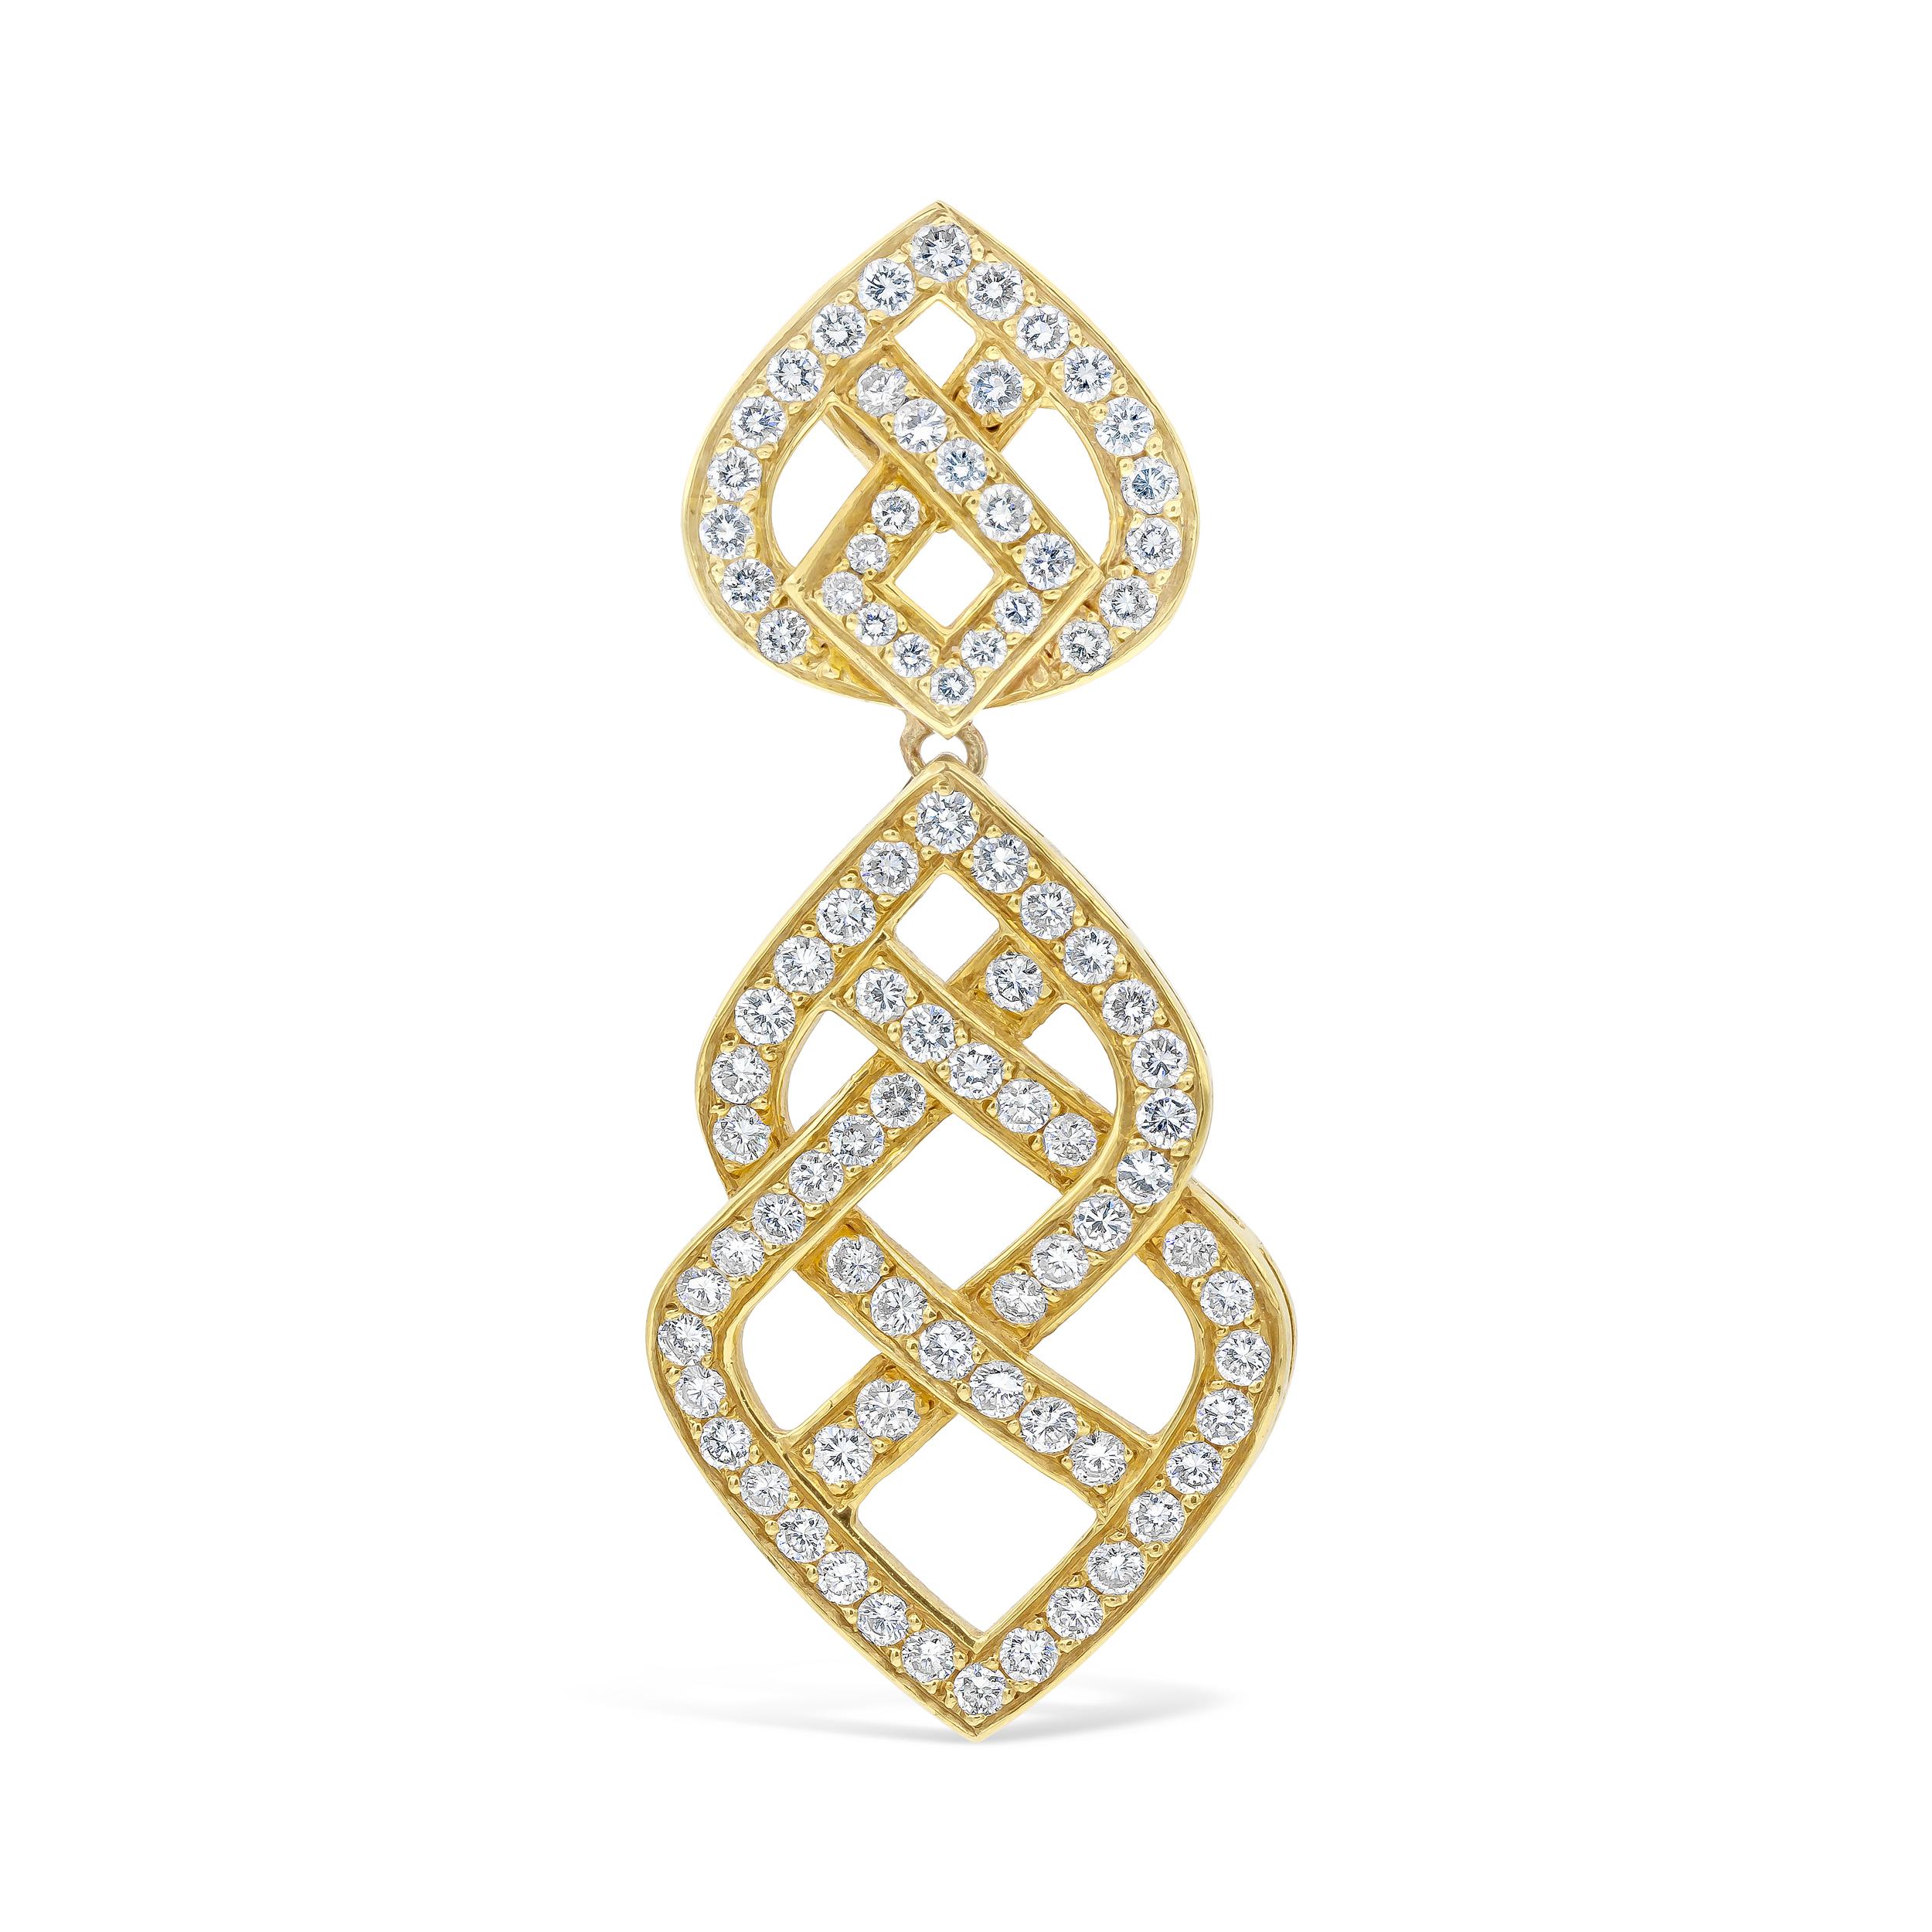 Showcasing an exquisite and fashionable dangle earrings set with brilliant round cut  diamonds that elegantly intertwine in an open-work design. Diamonds weigh 6.44 carats total and Finely made in 18k yellow gold.

Style available in different price